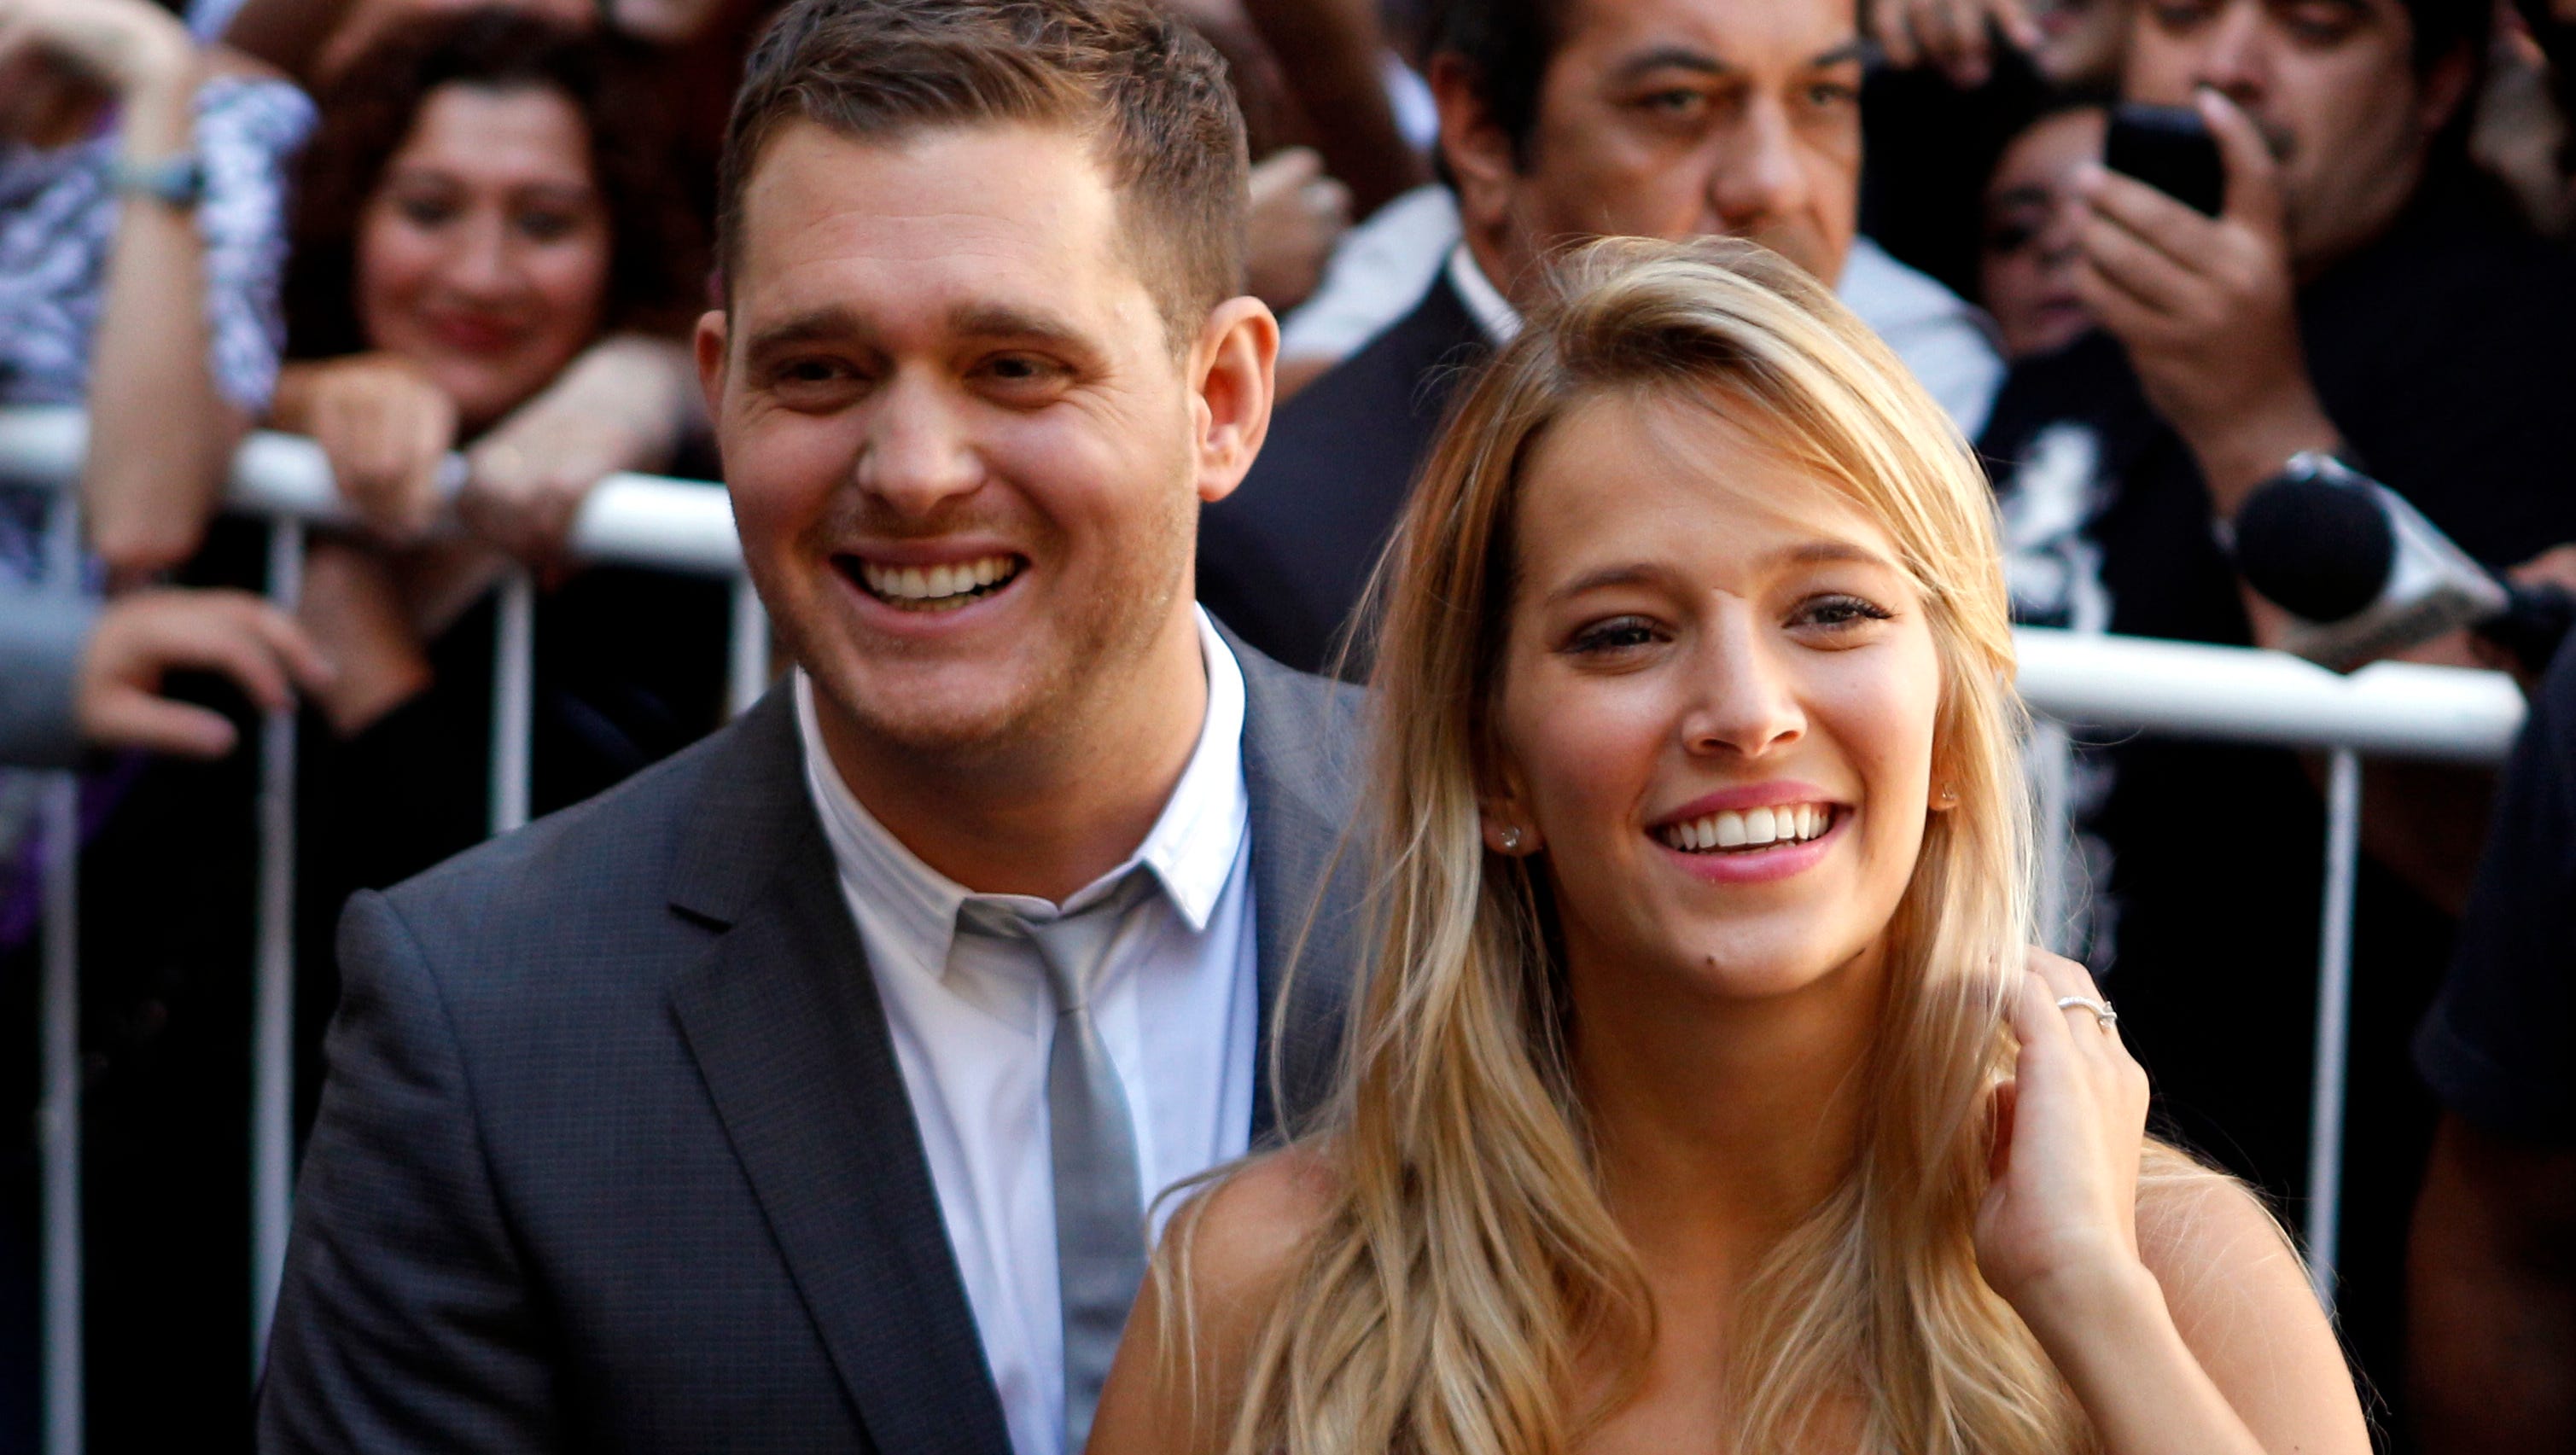 Michael Bublé And Wife Luisana Lopilato Welcome First Daughter Vida